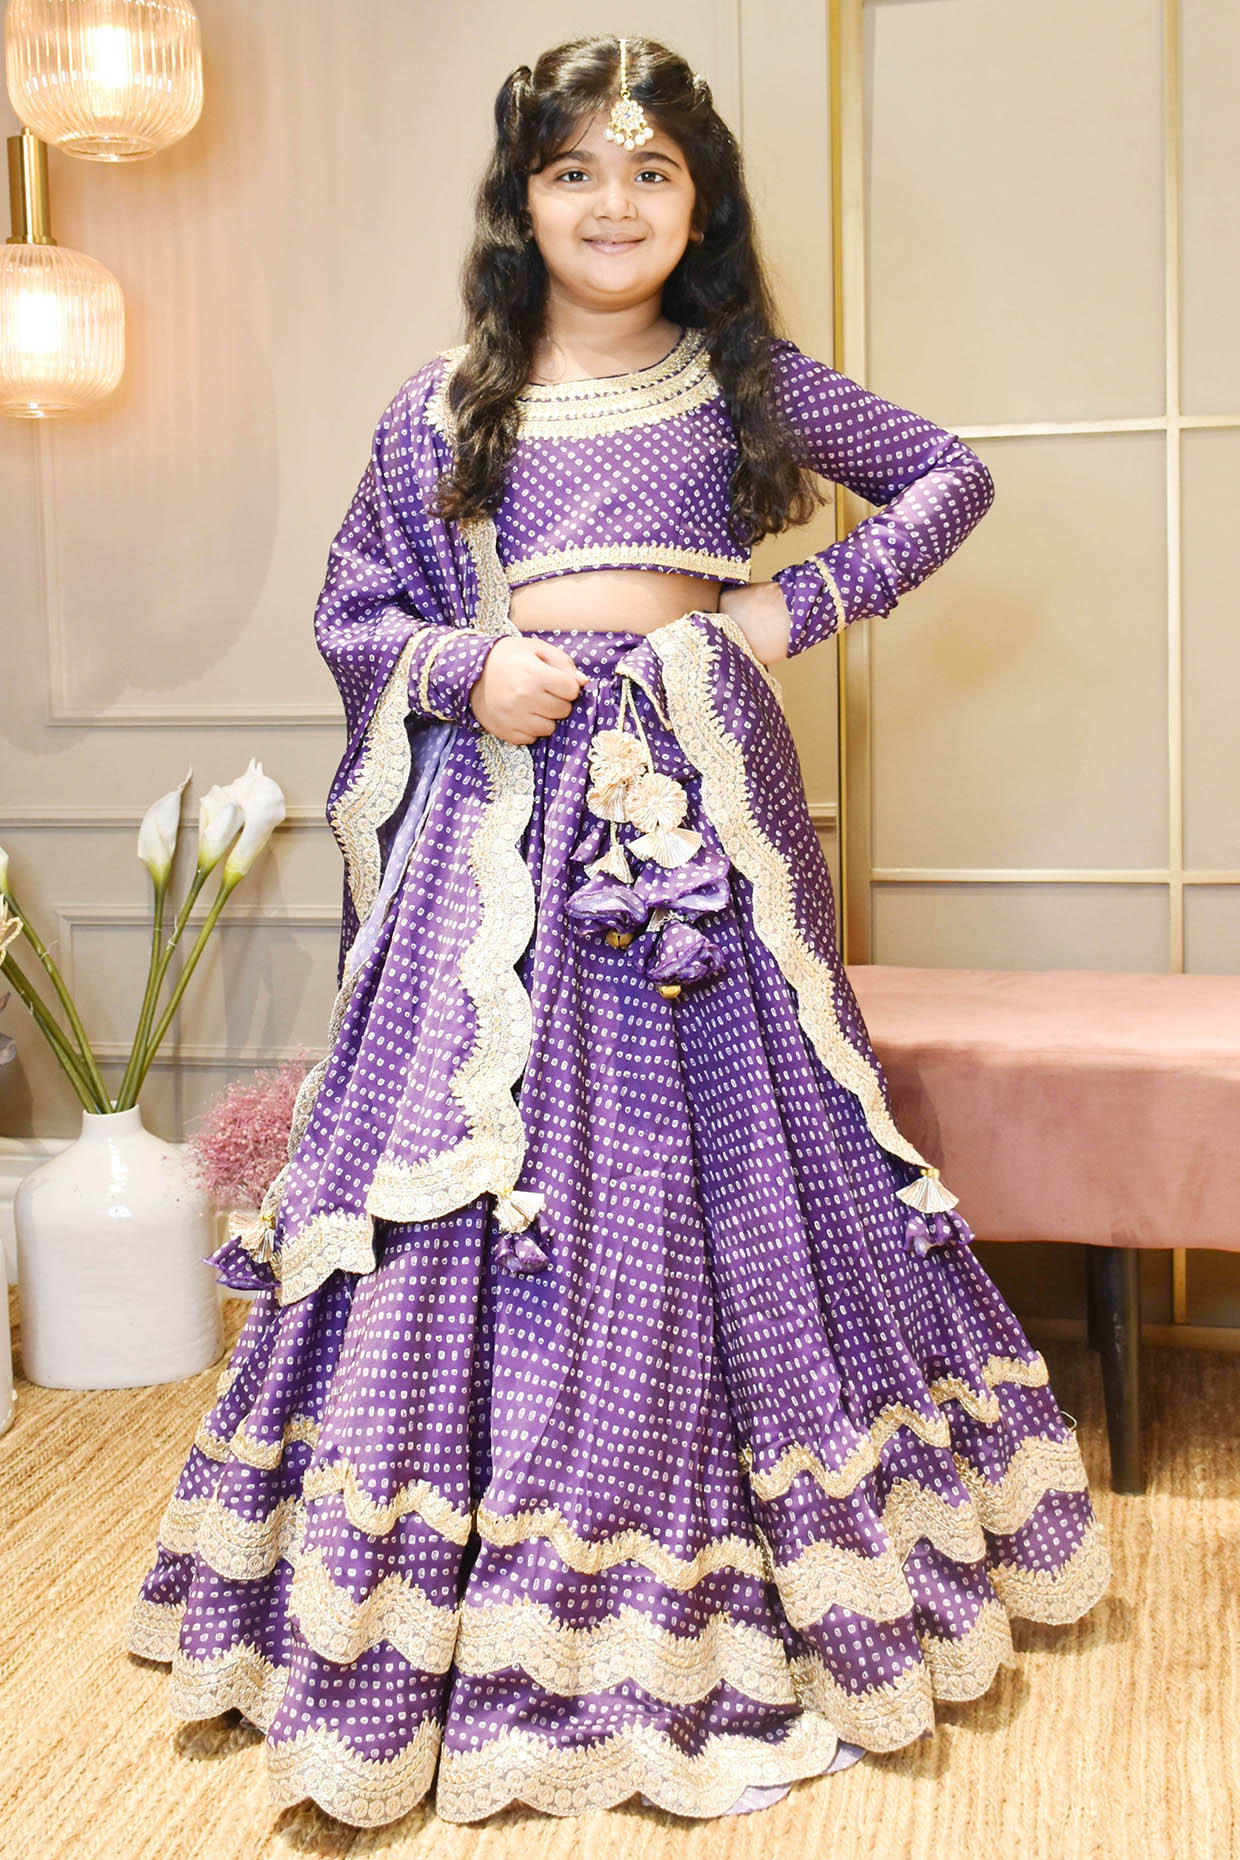 Tips For Dressing Your Child Comfortably In A Lehenga - KALKI Fashion Blog